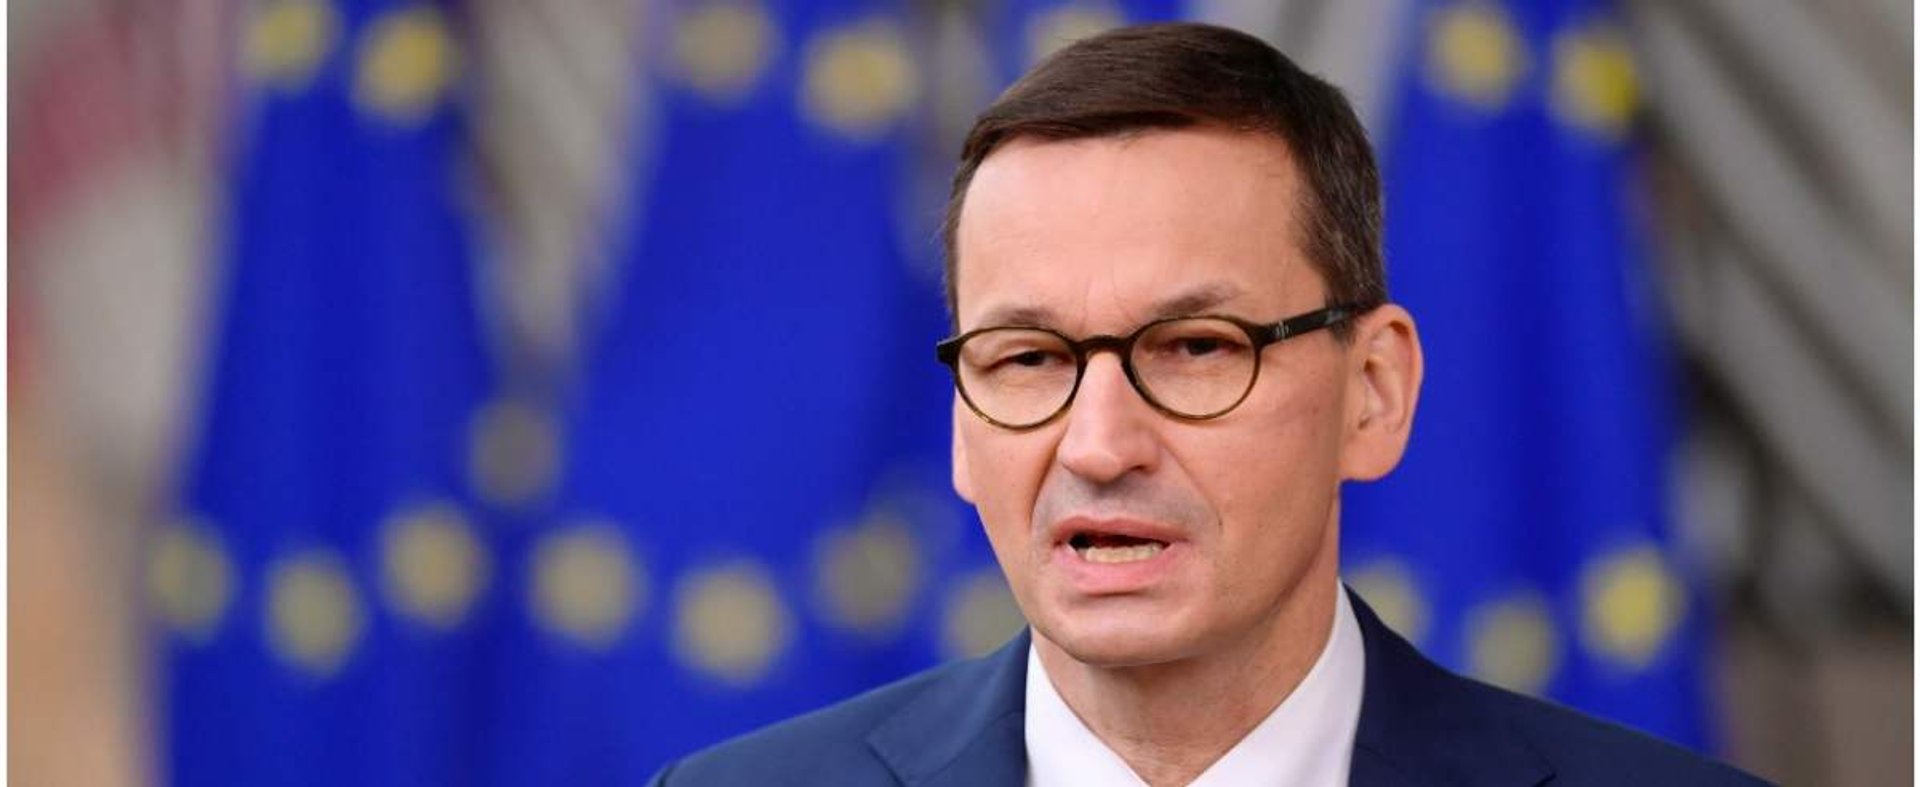 Poland's Prime Minister Mateusz Morawiecki speaks to the press as he arrives at the EU headquarters' Europa building in Brussels on December 10, 2020, prior to a European Union summit. (Photo by JOHN THYS / POOL / AFP)